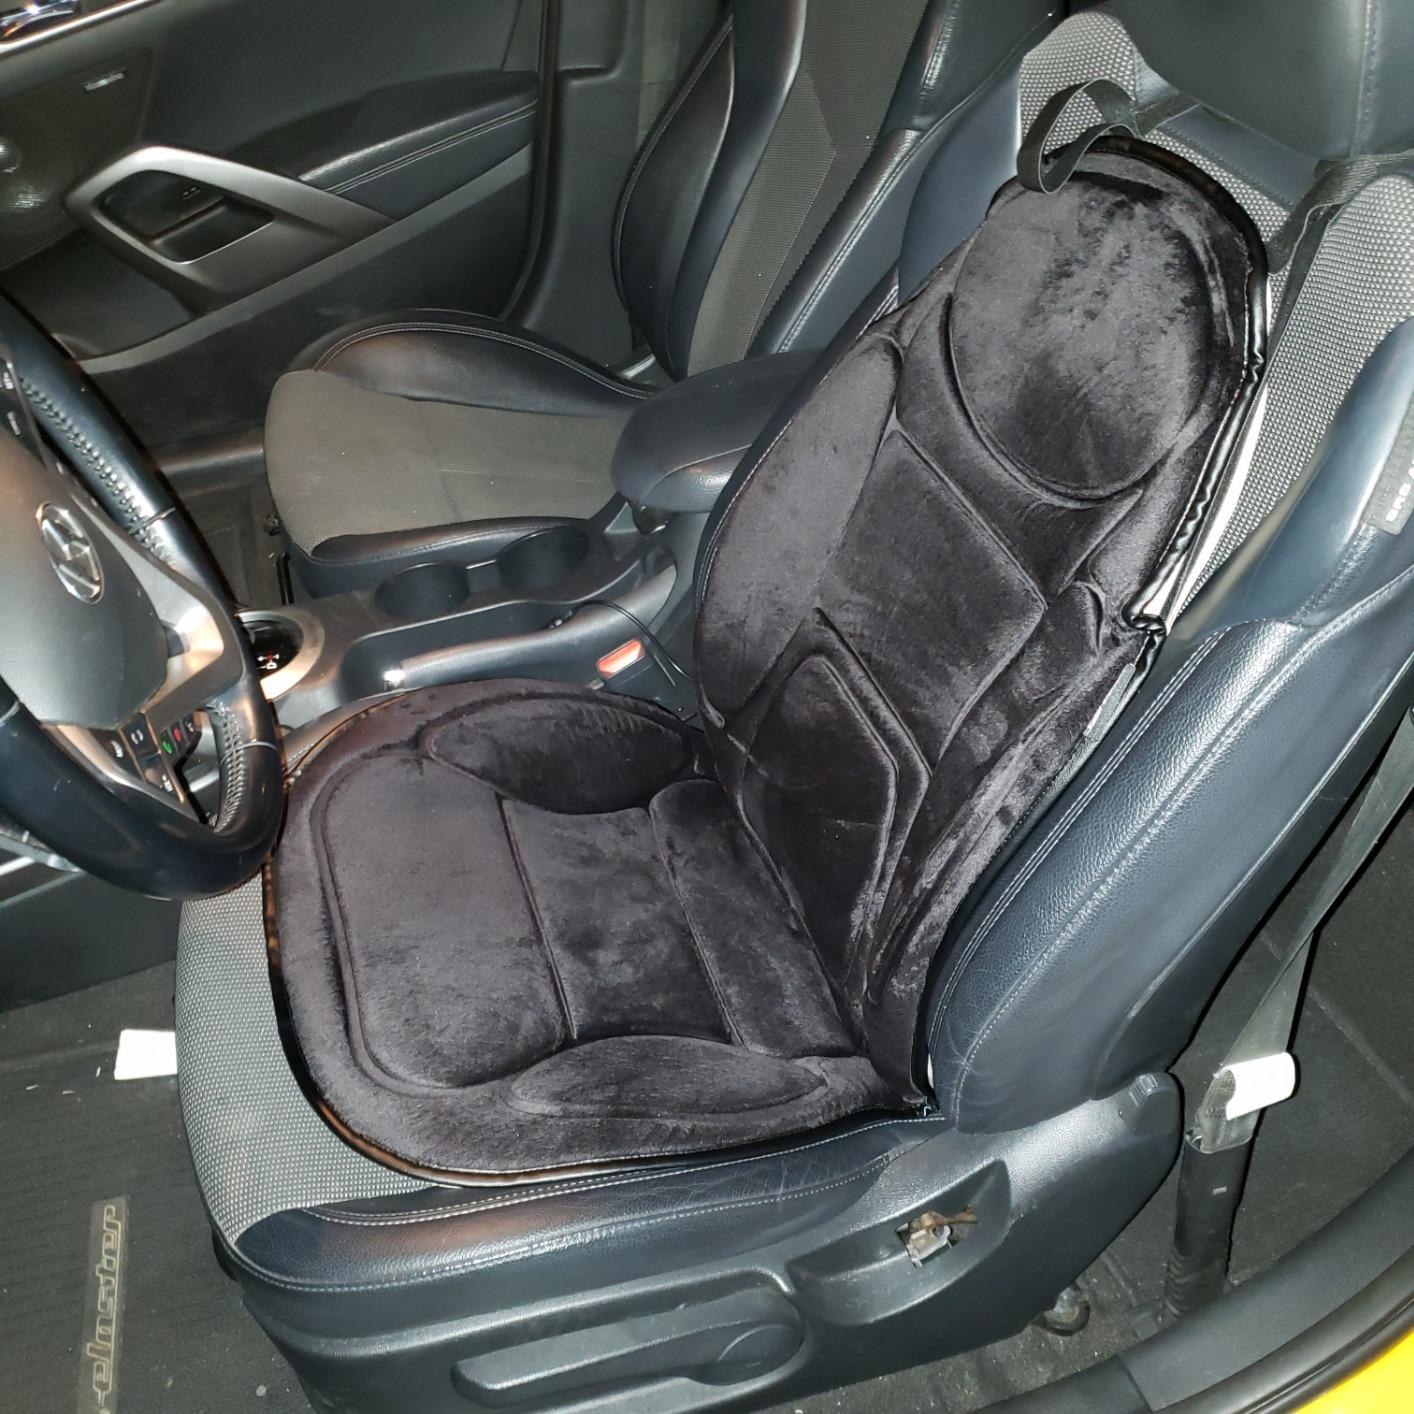 Reviewer photo of the seat warmer on the drivers seat